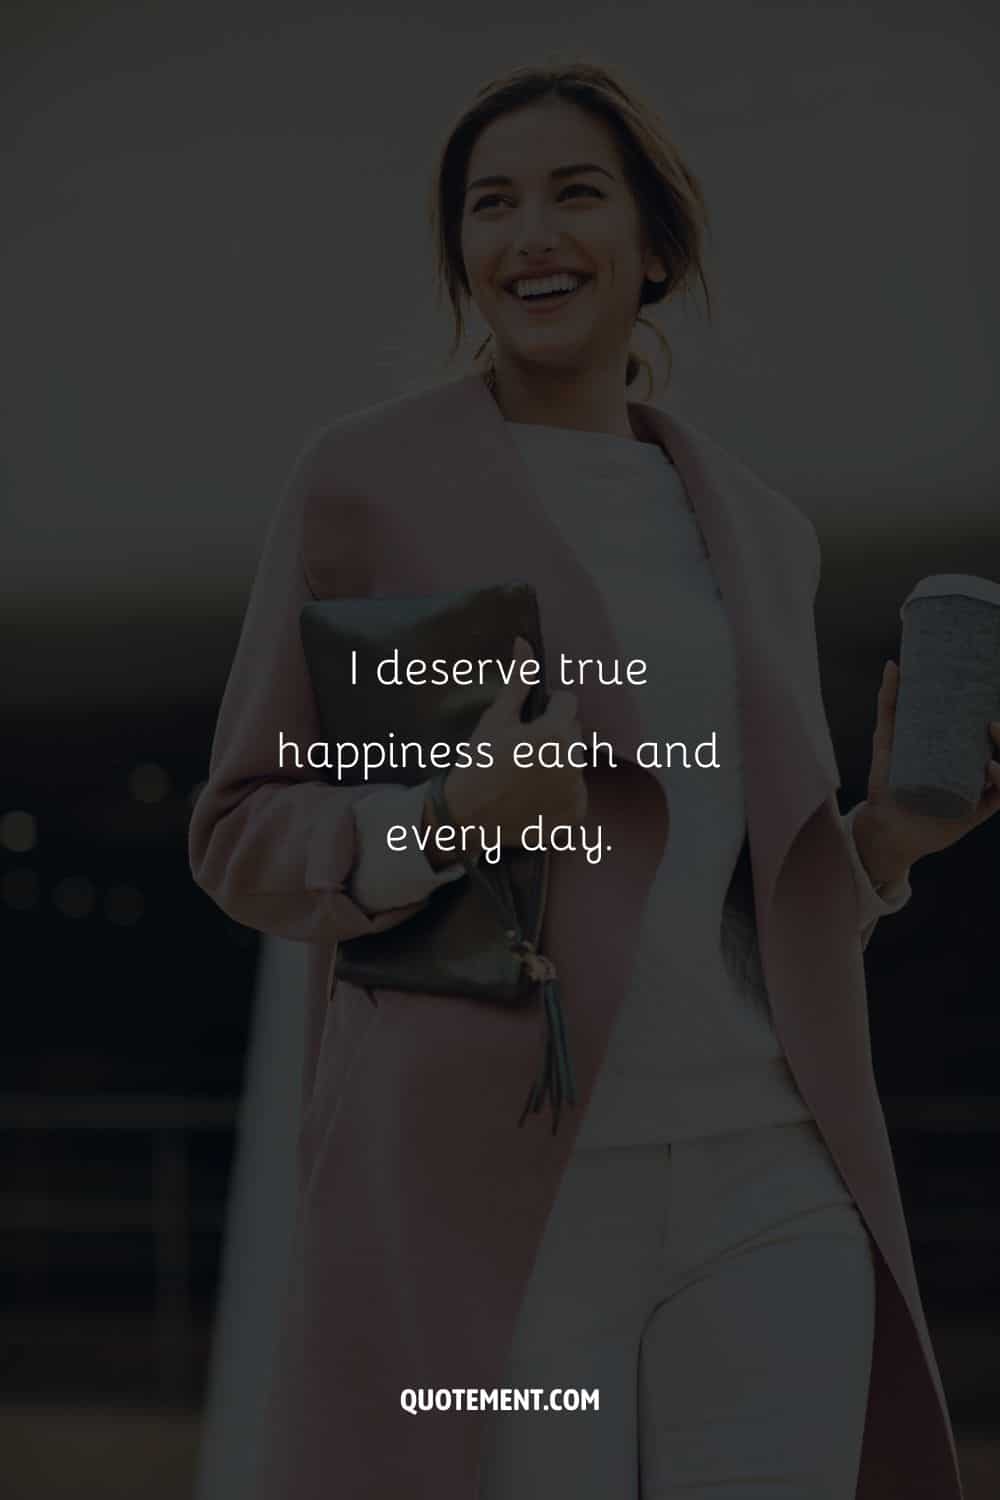 Stylish woman with coffee in her hand representing an affirmation for happiness